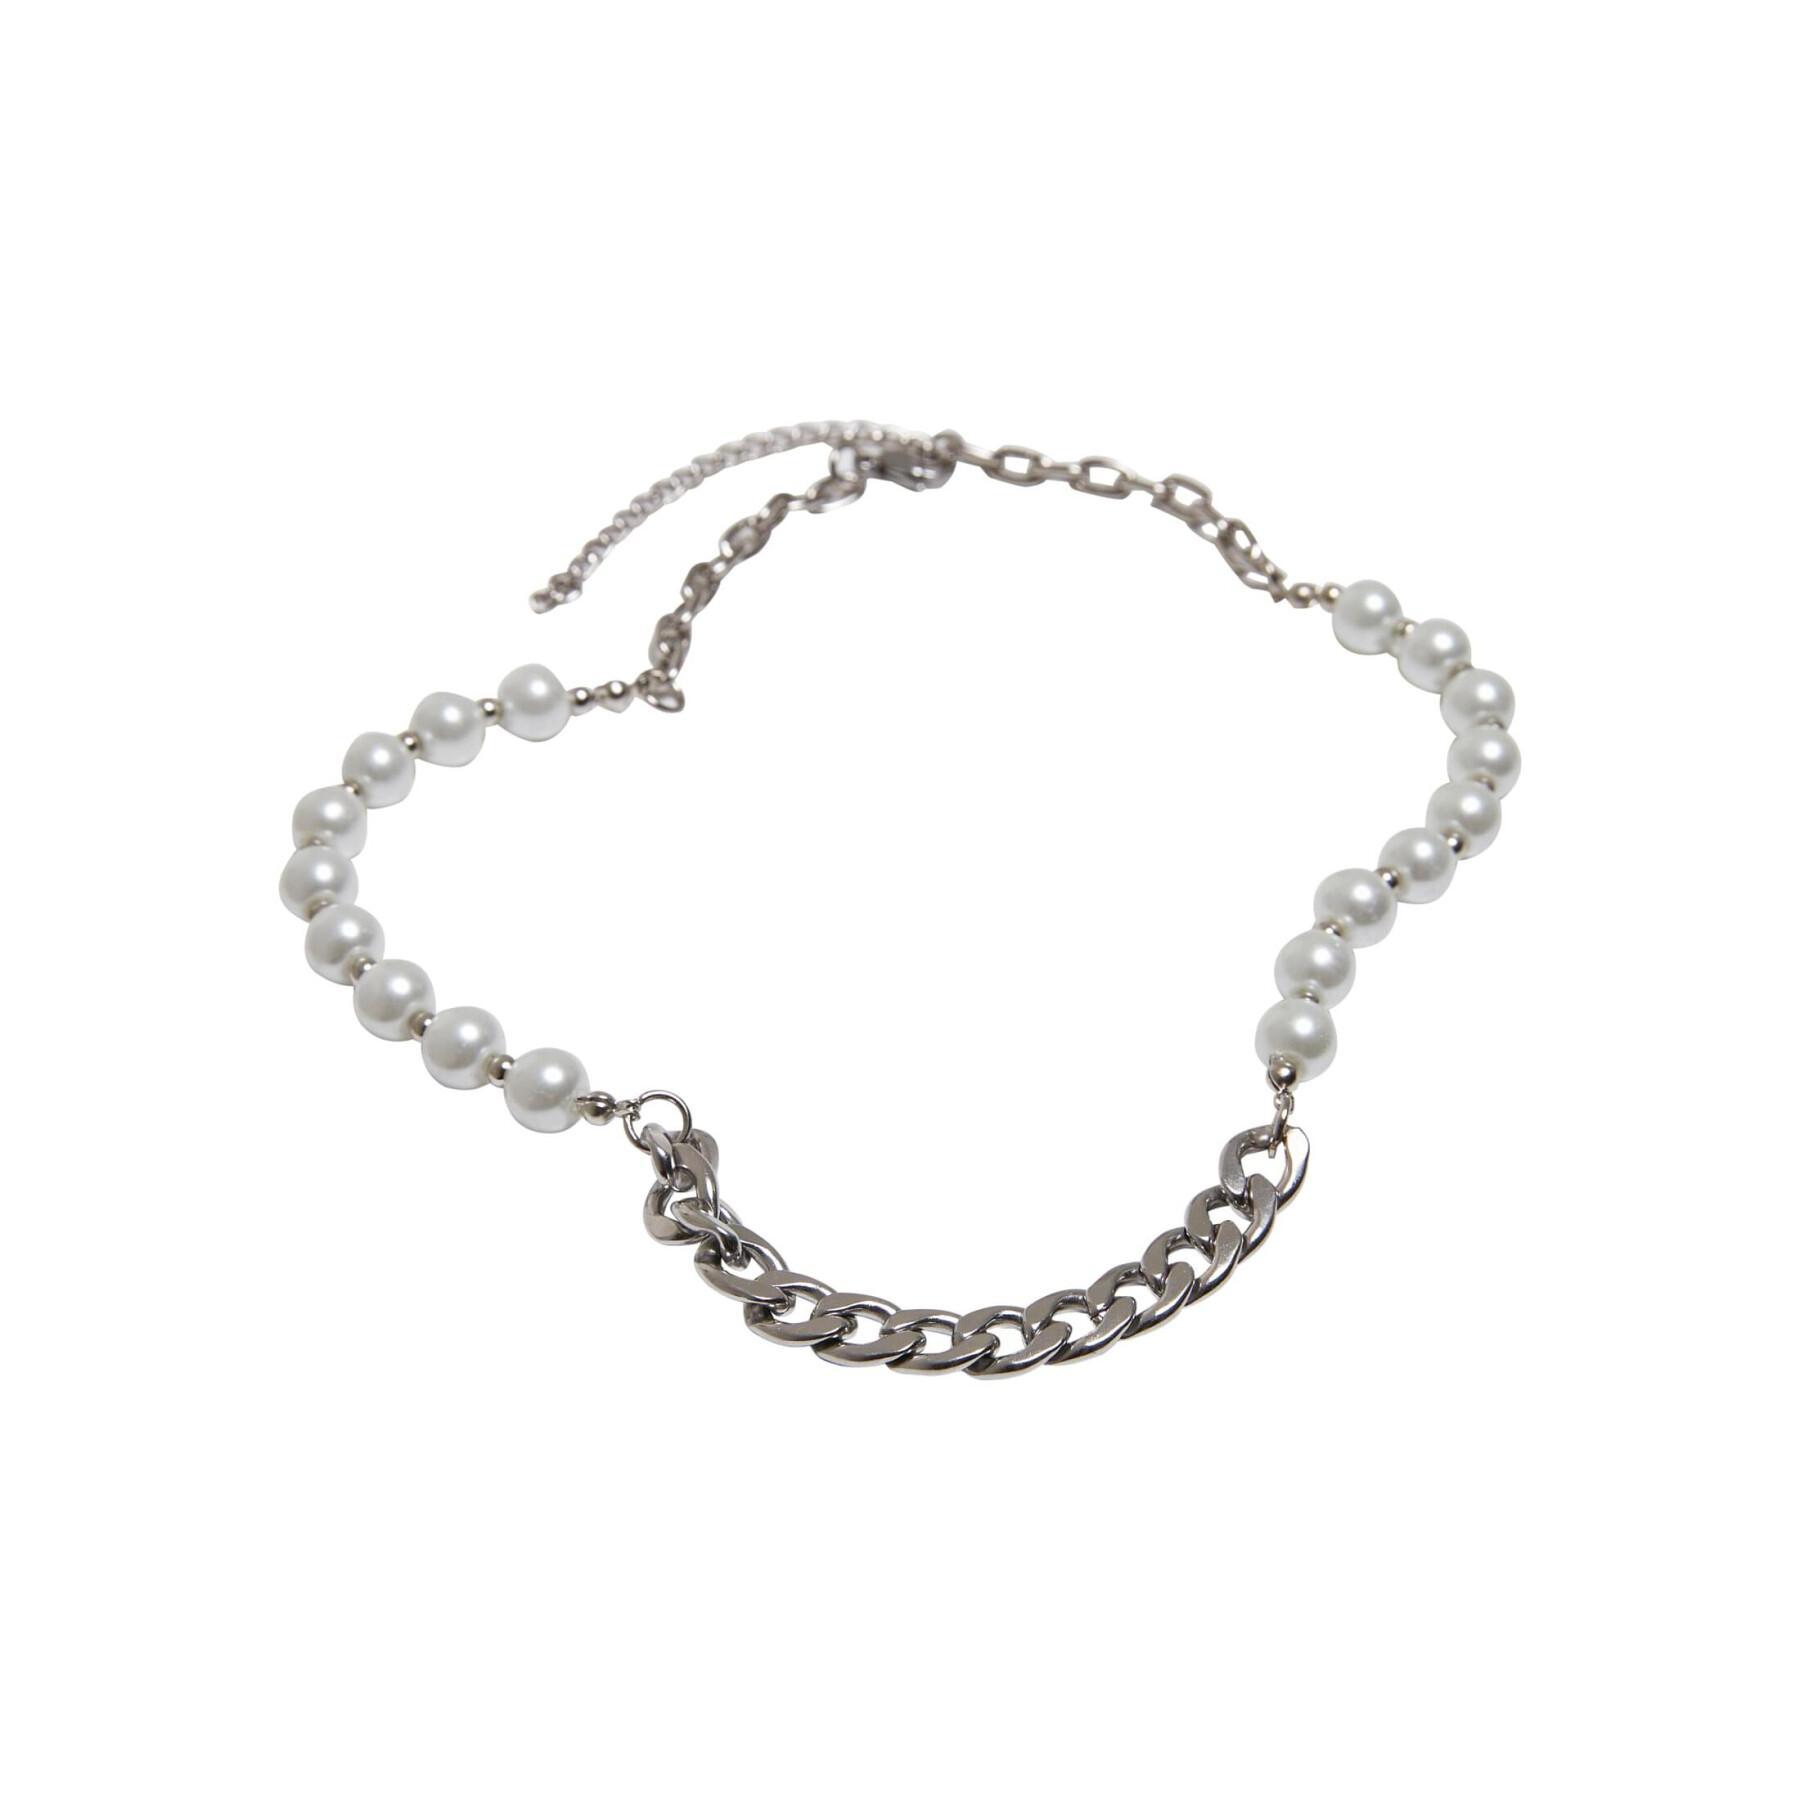 Women's necklace Urban Classics Pearl Various Chain